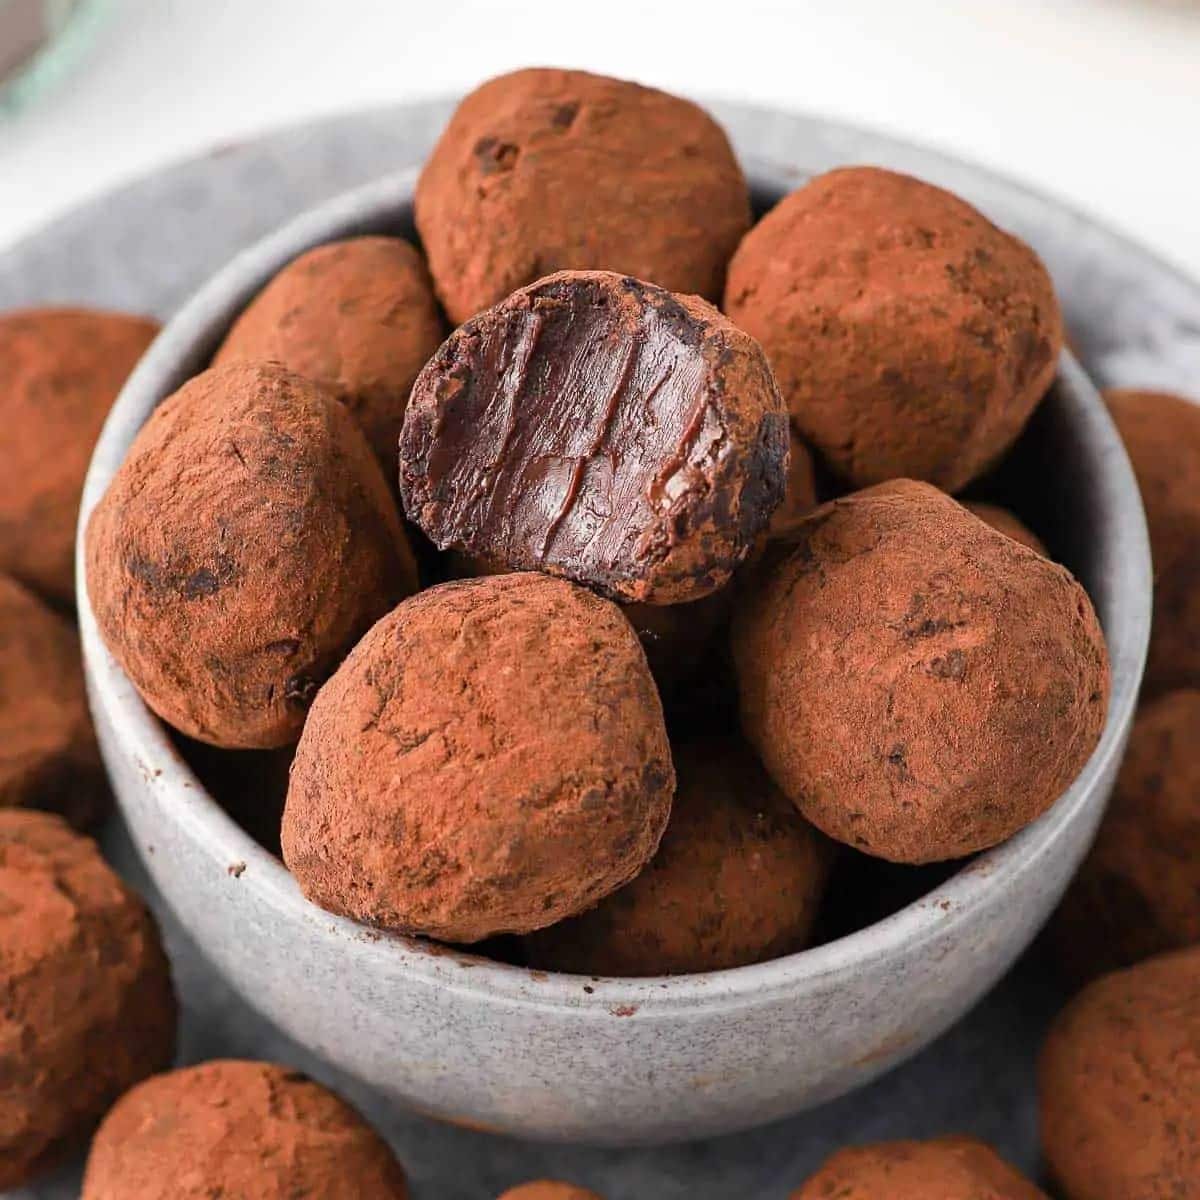 French Chocolate Truffles in a gray bowl.